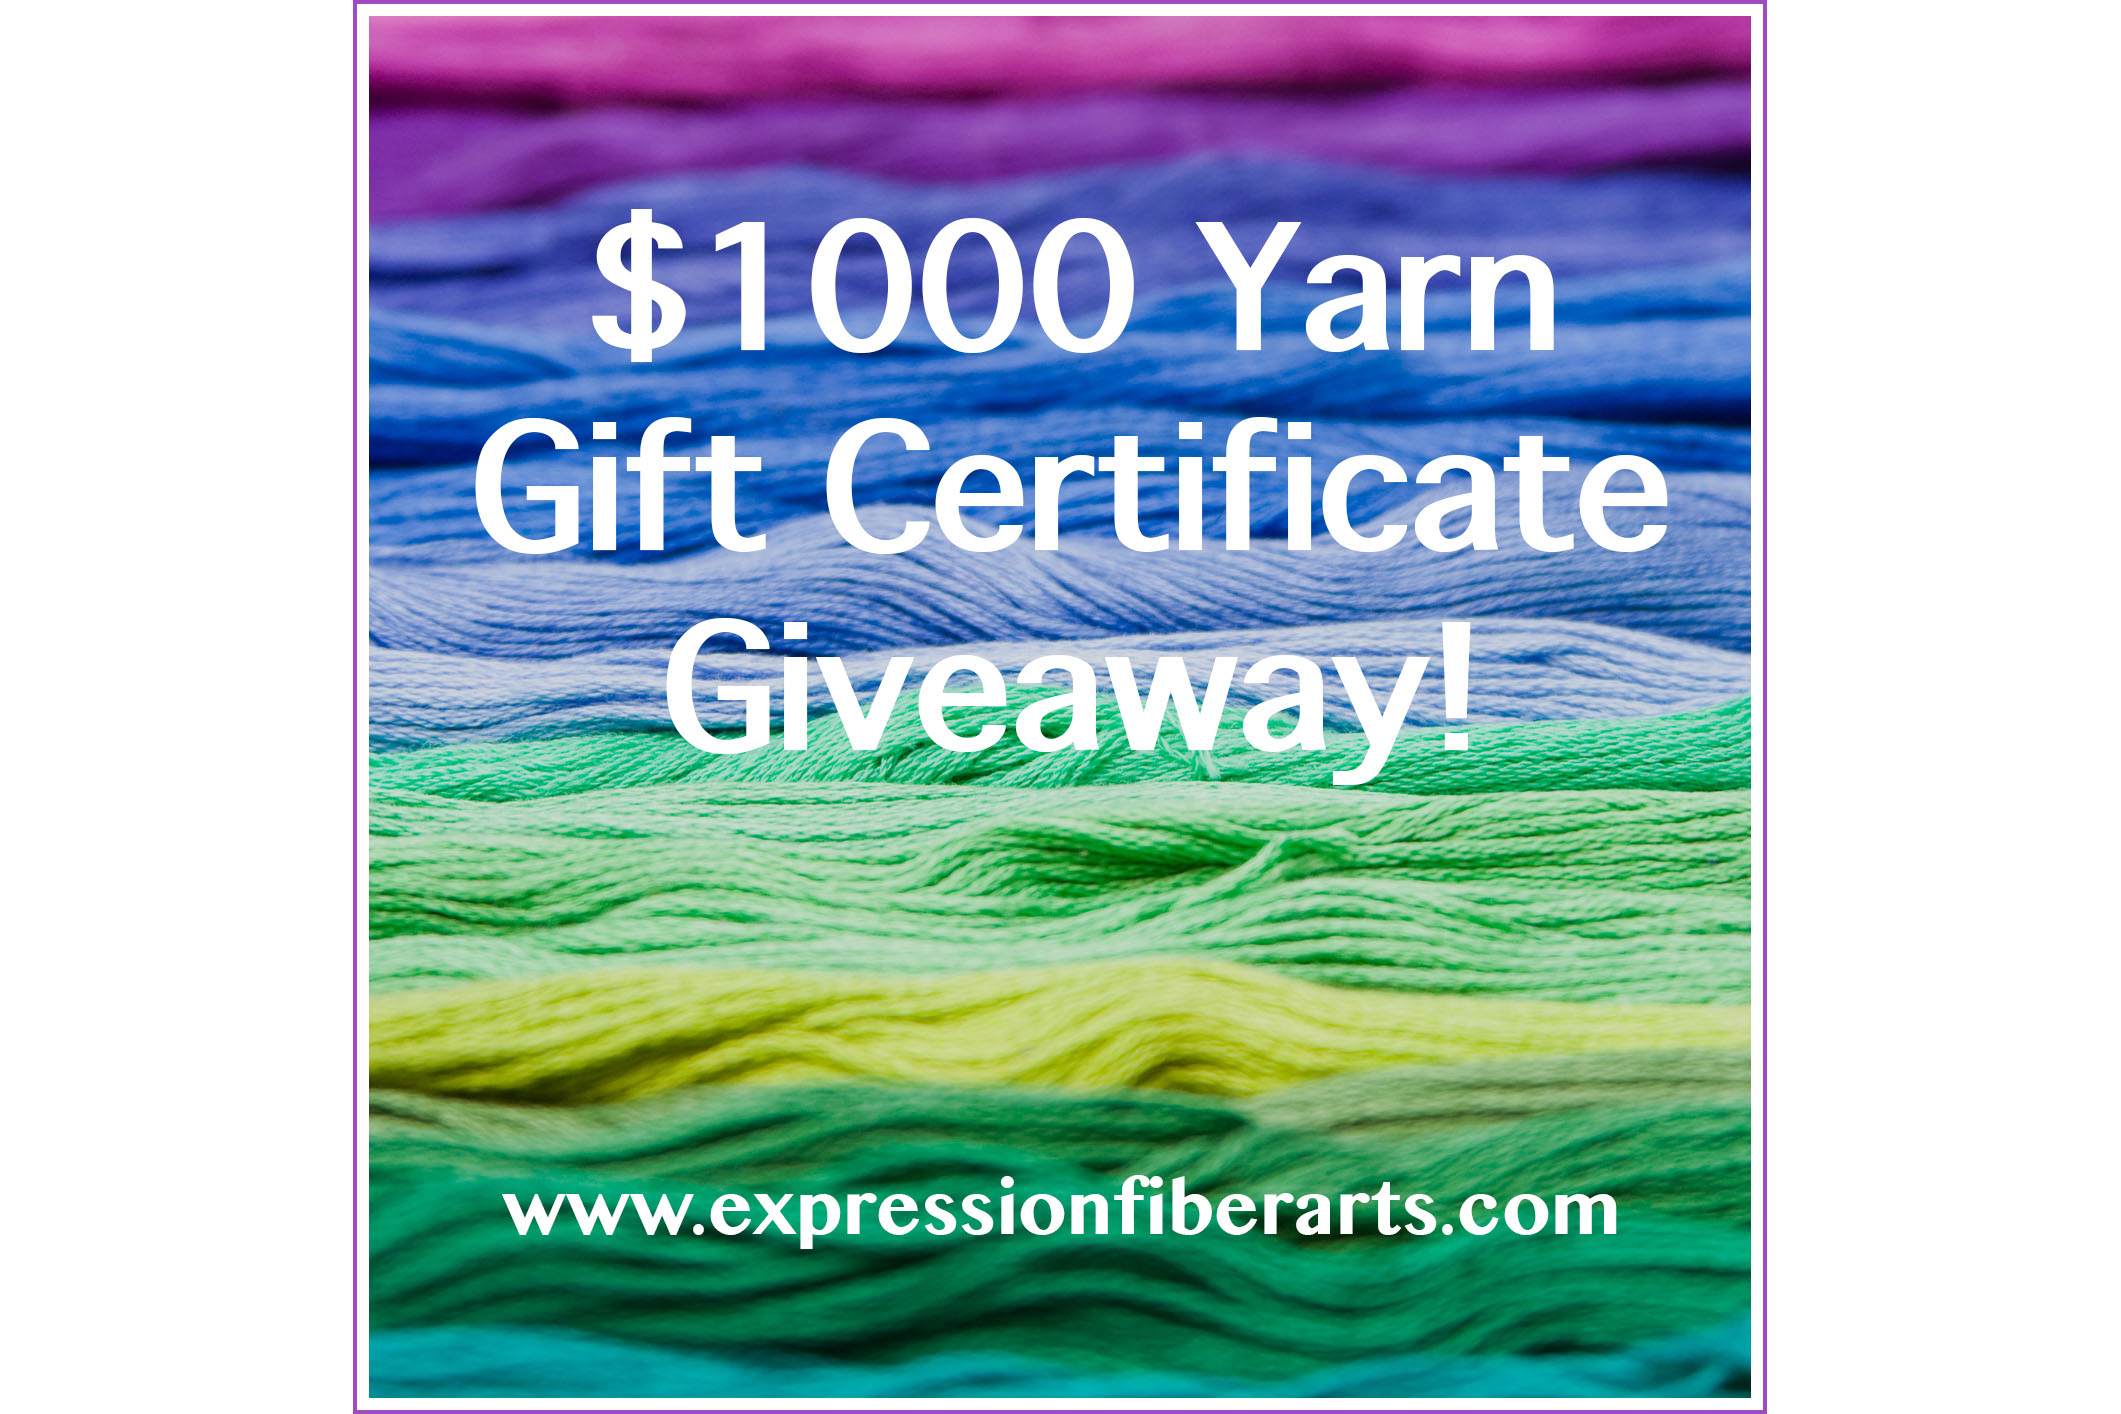 $1000 Yarn Gift Certificate Giveaway! pic